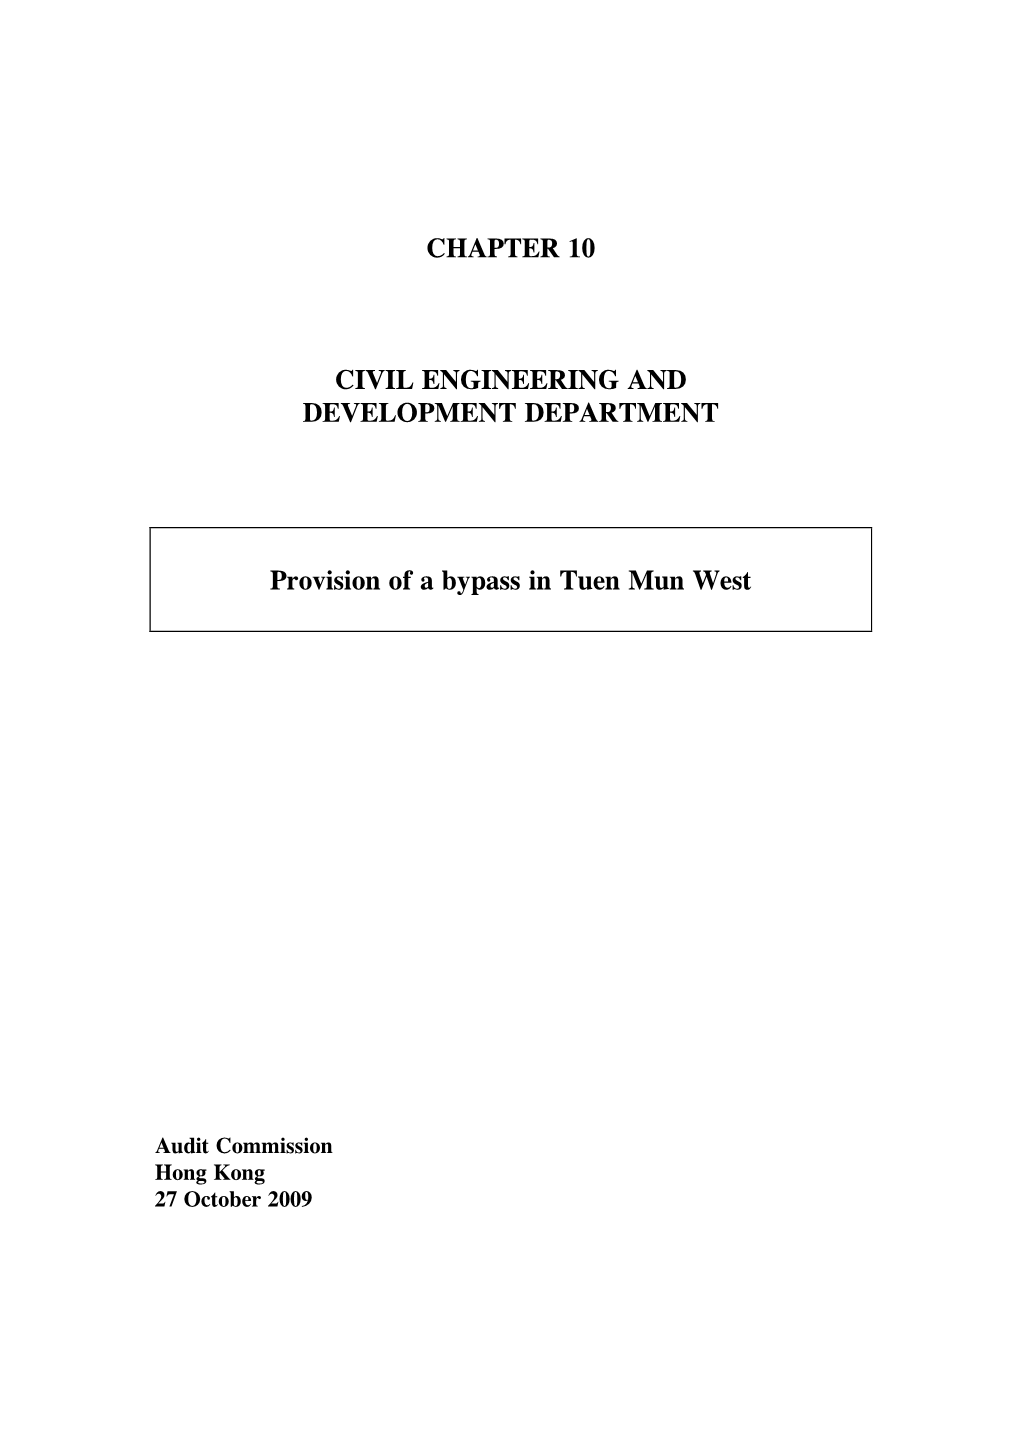 Chapter 10 Civil Engineering and Development